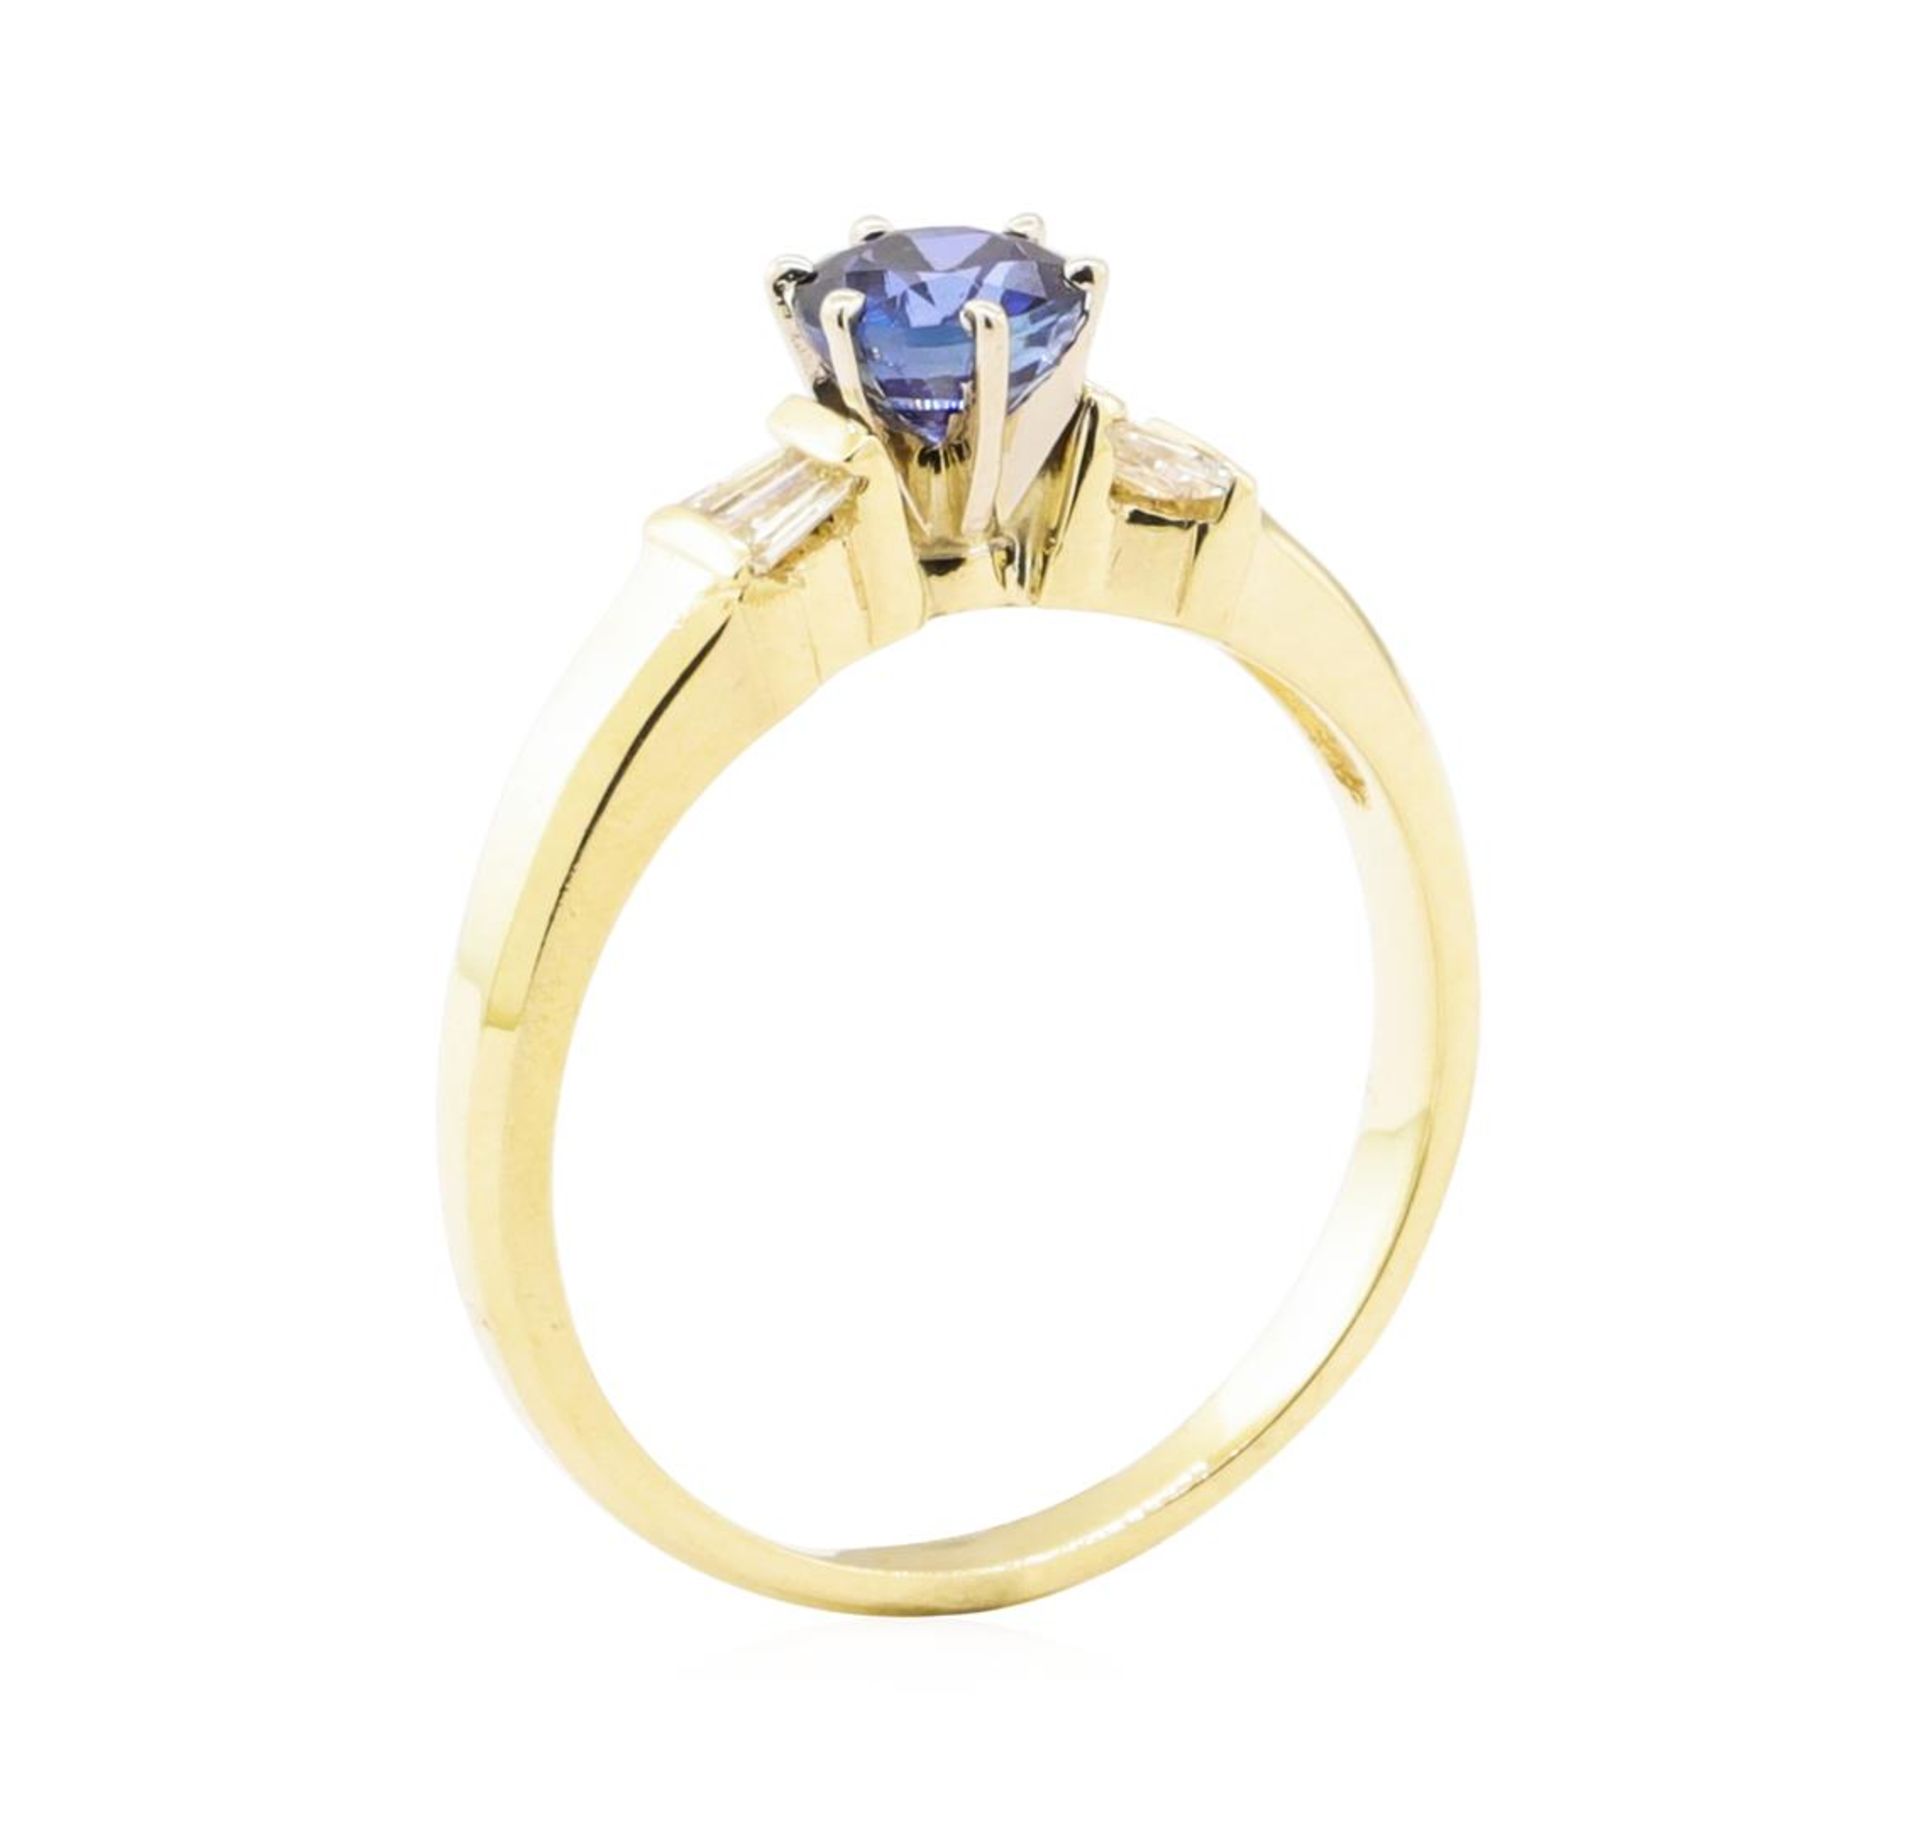 0.98ctw Blue Sapphire and Diamond Ring - 14KT Yellow Gold - Image 4 of 4